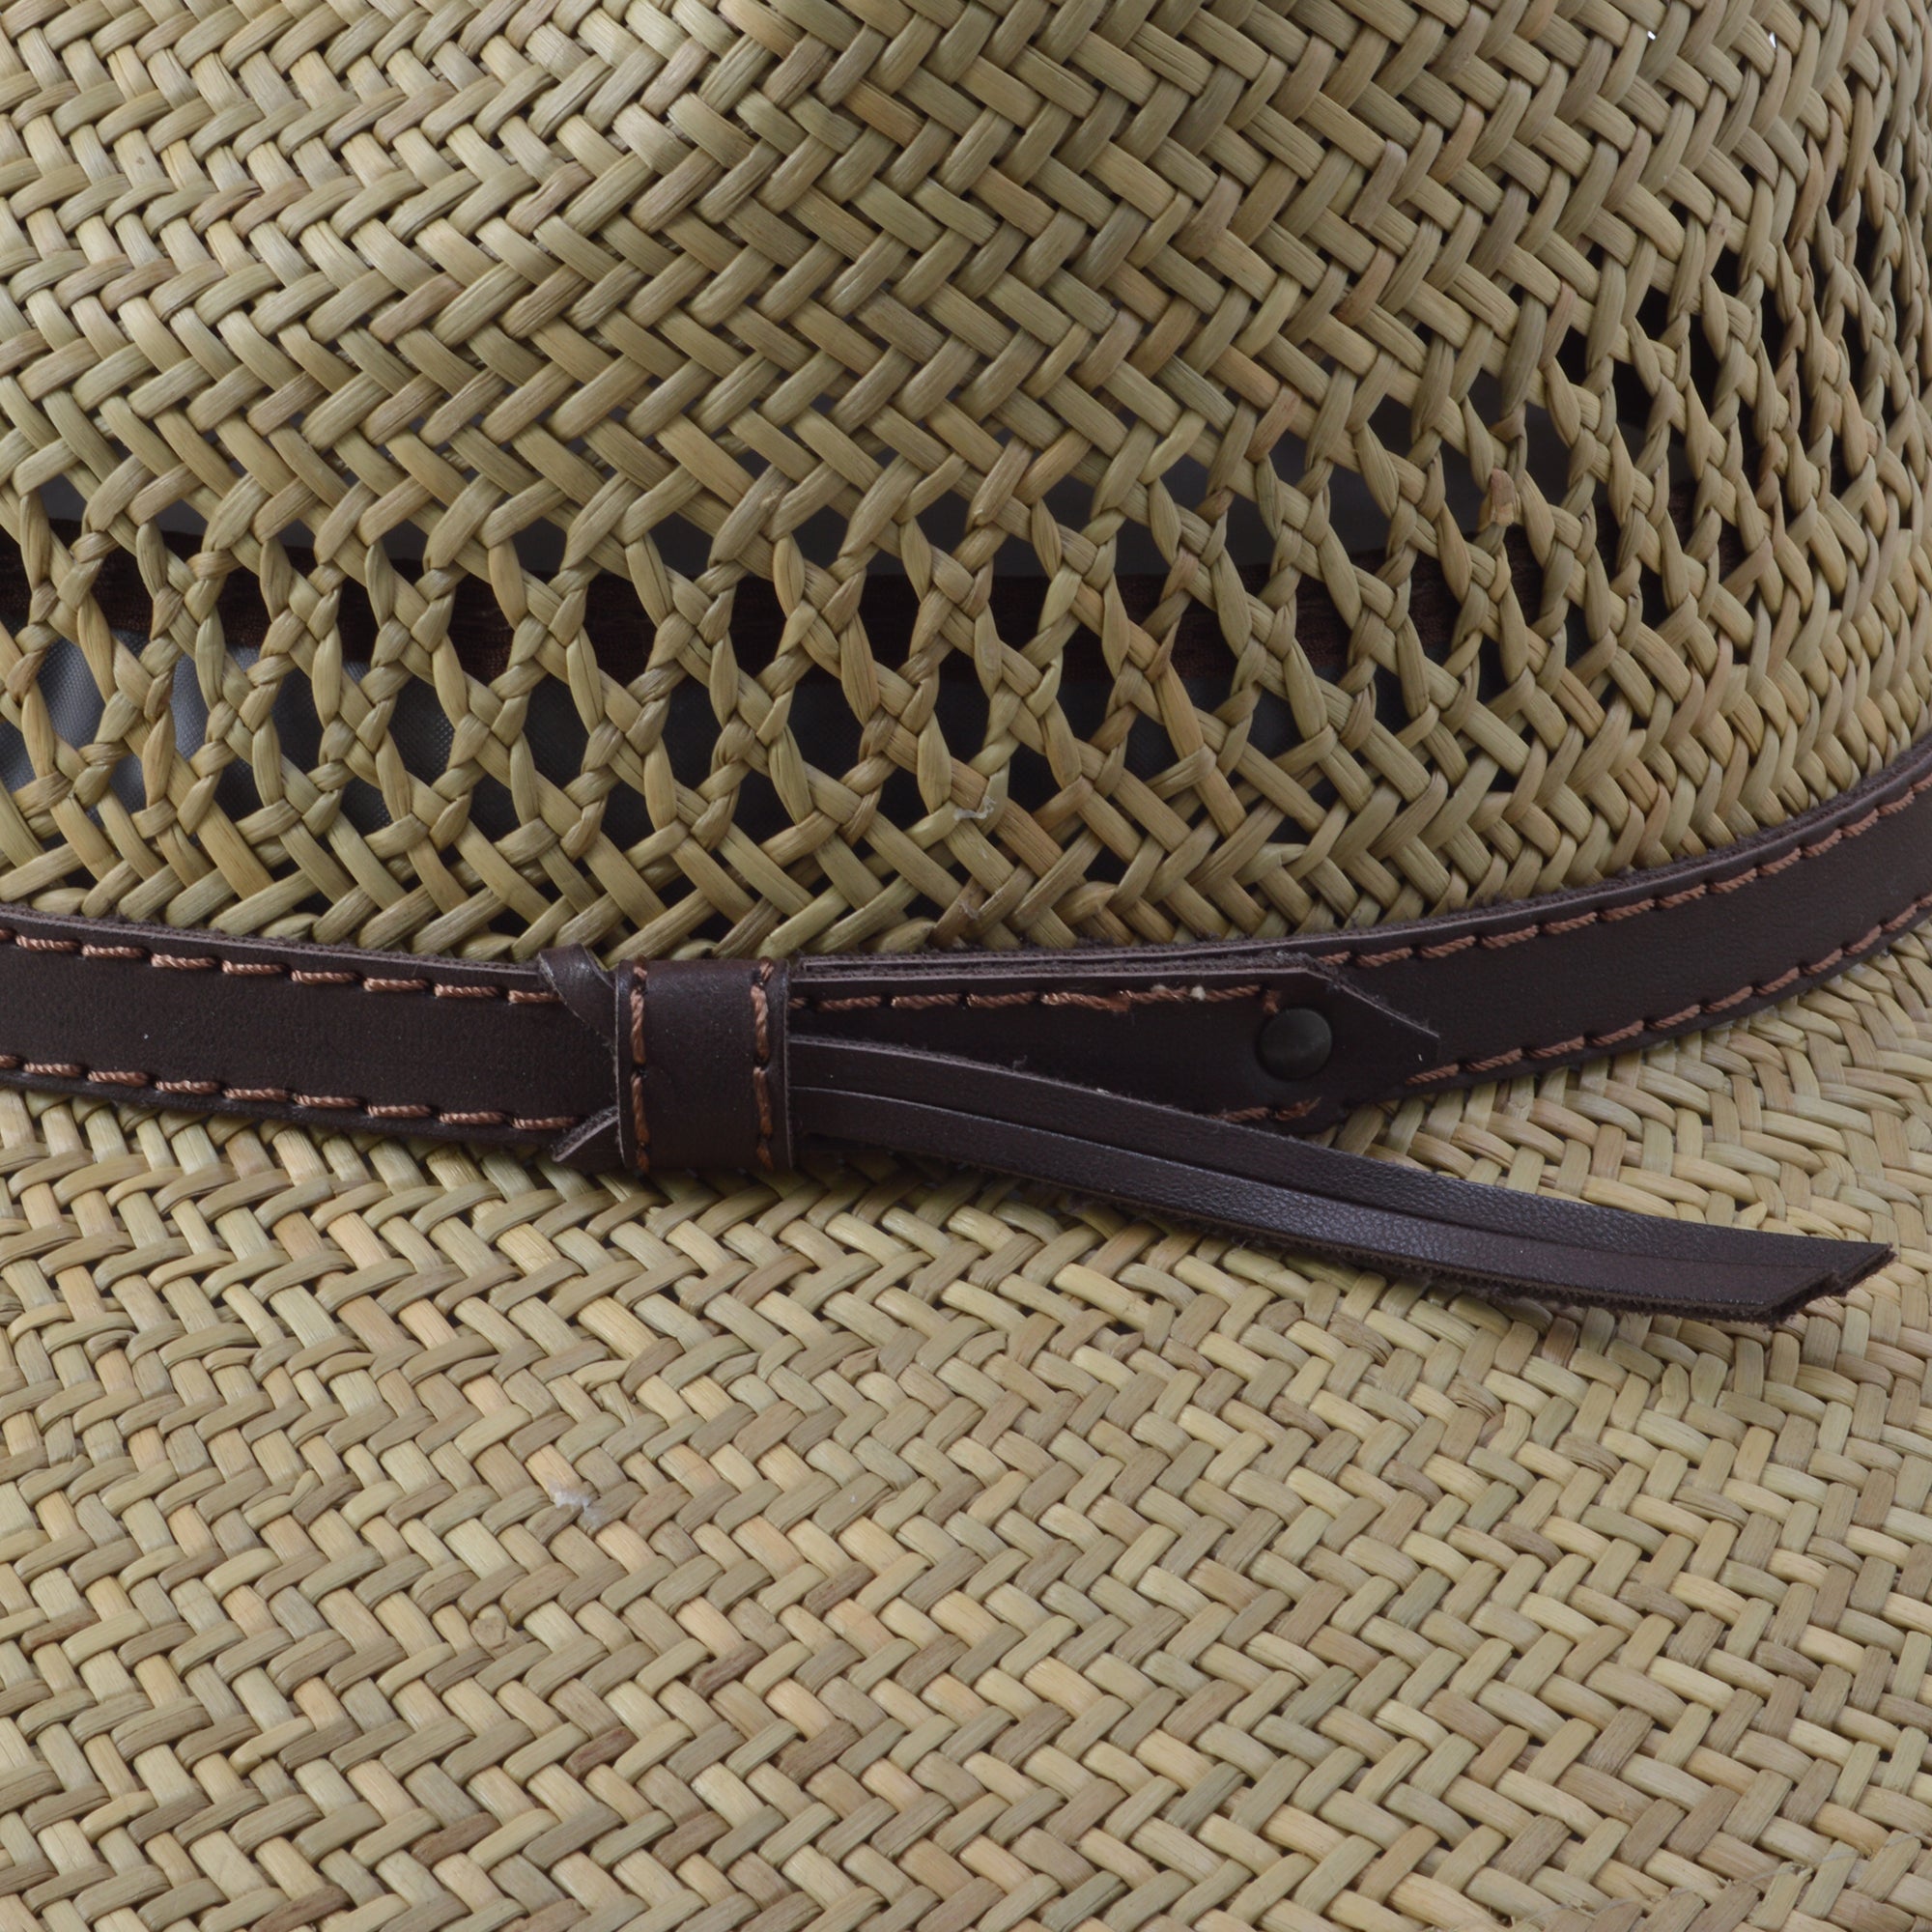 Stetson Childress Vented Seagrass Straw Hat